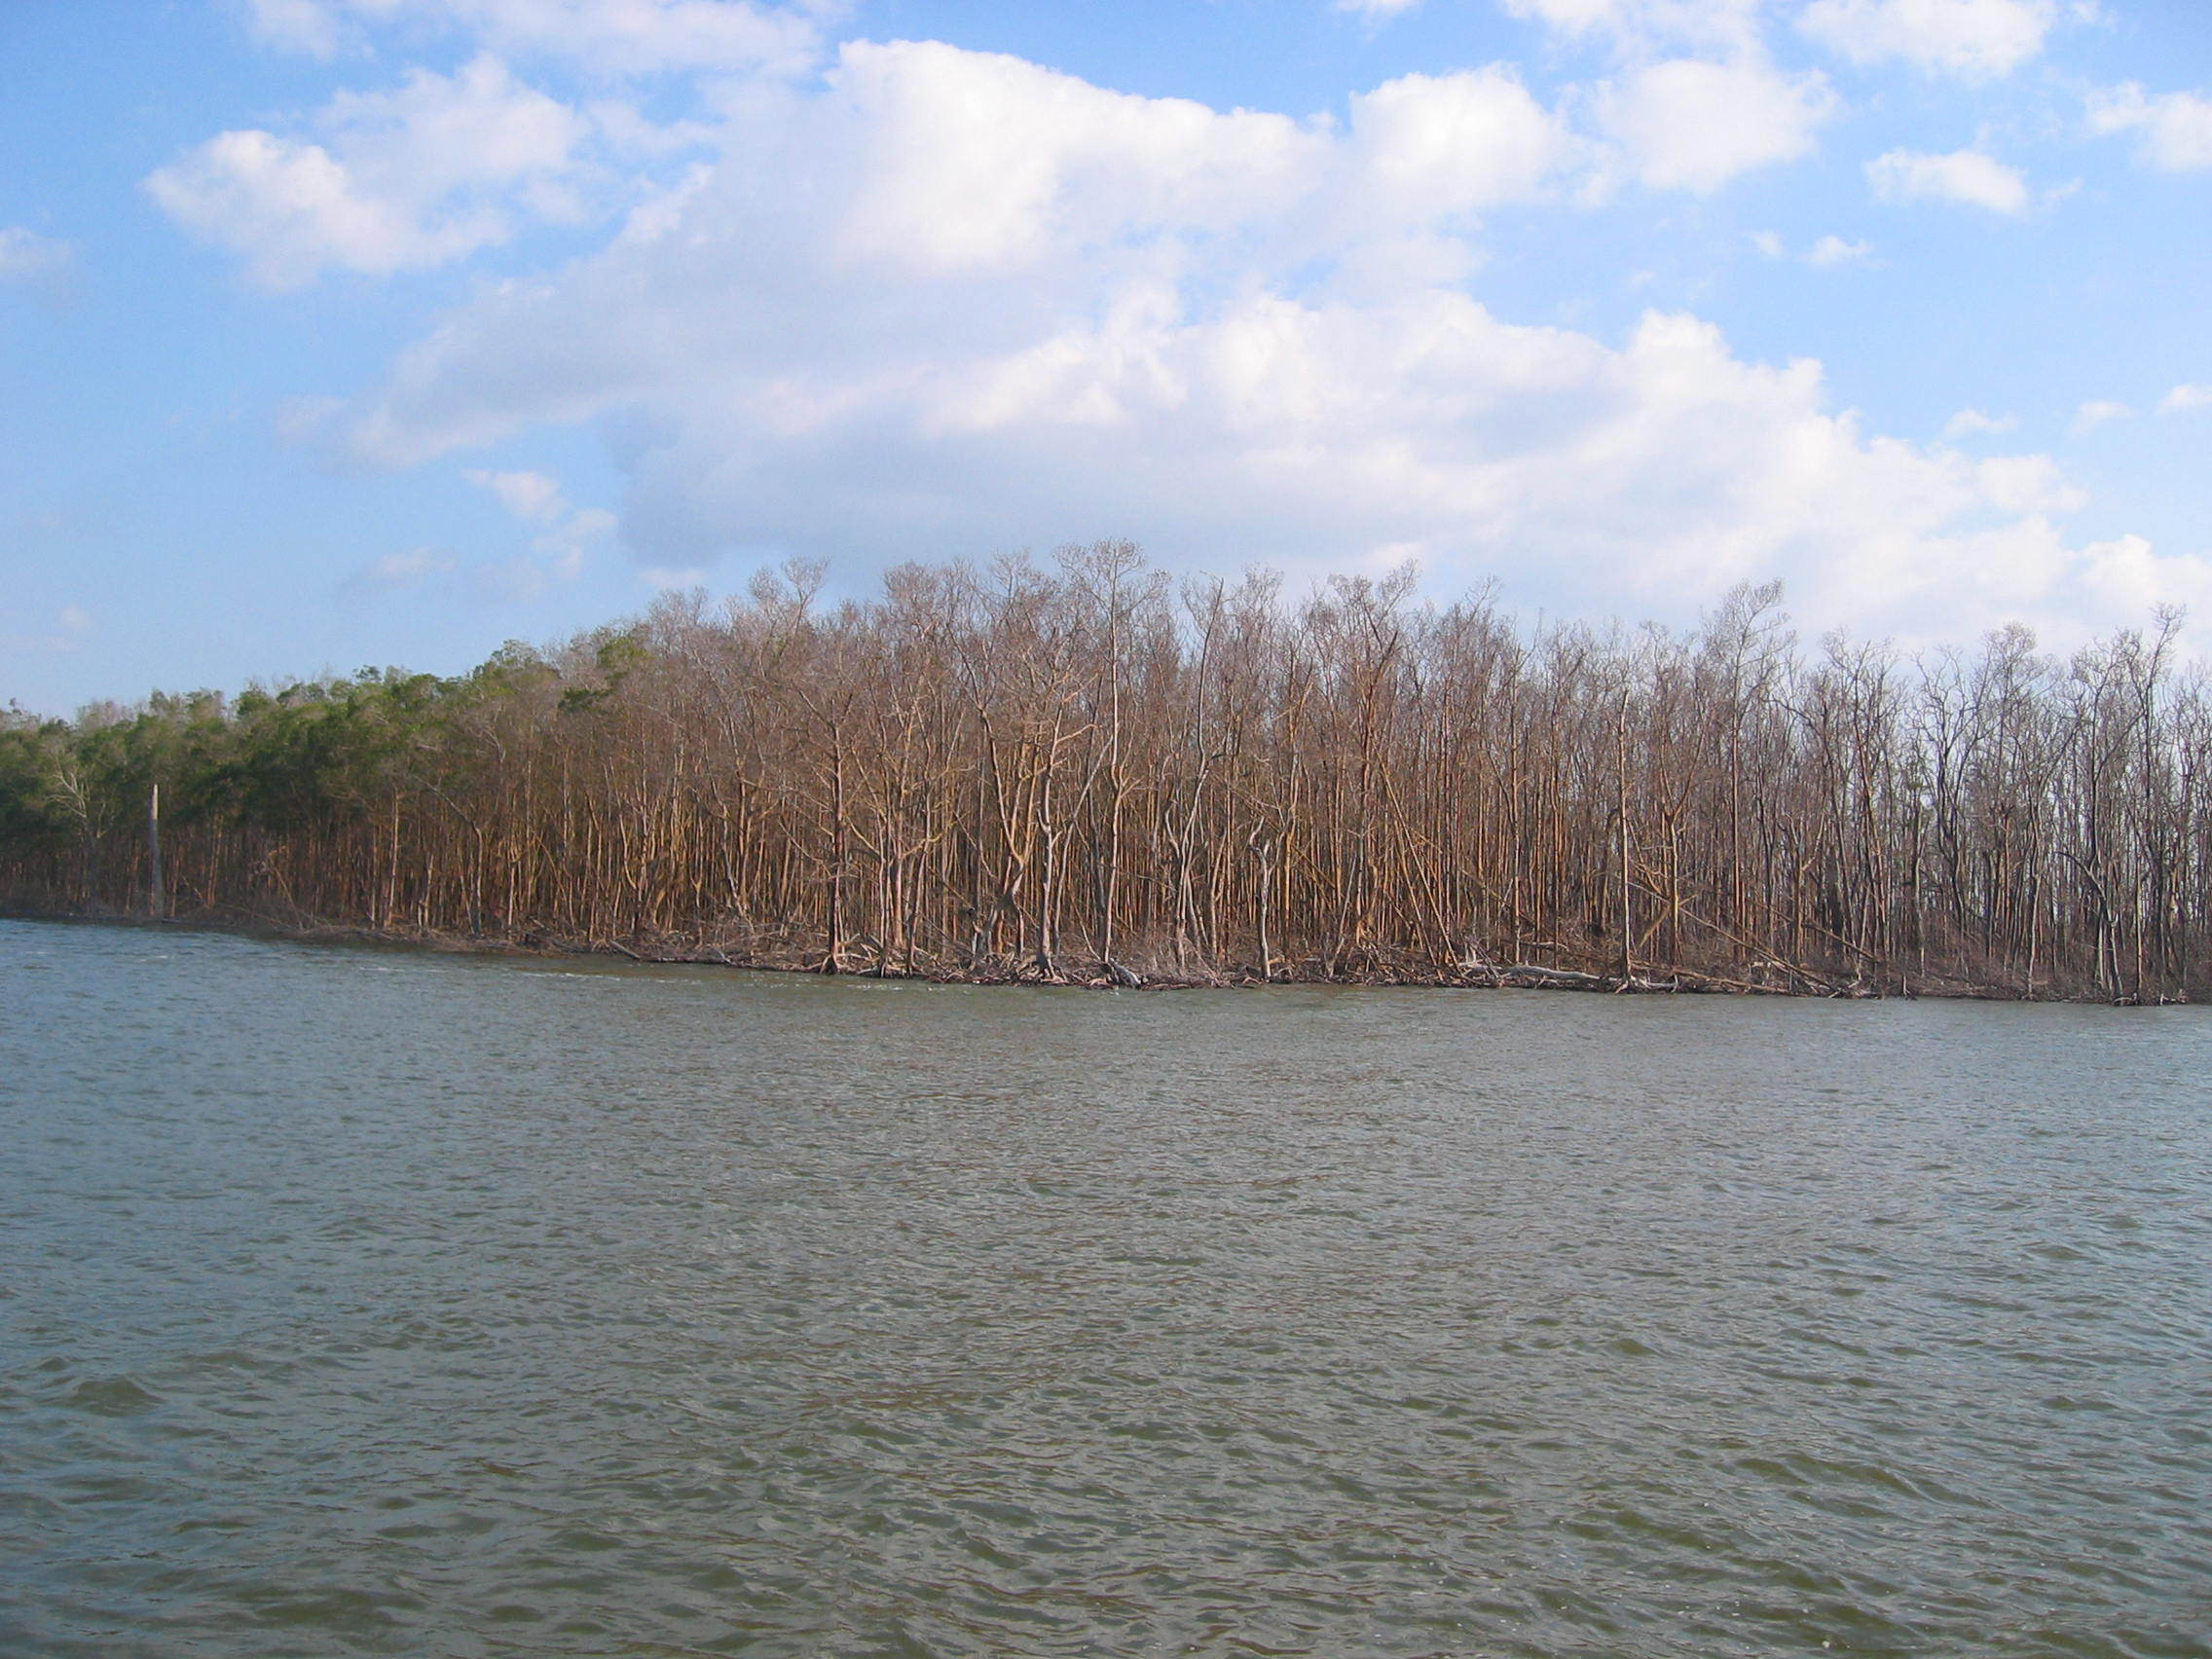 Mangrove forest in Shark River damaged by Hurricane Wilma